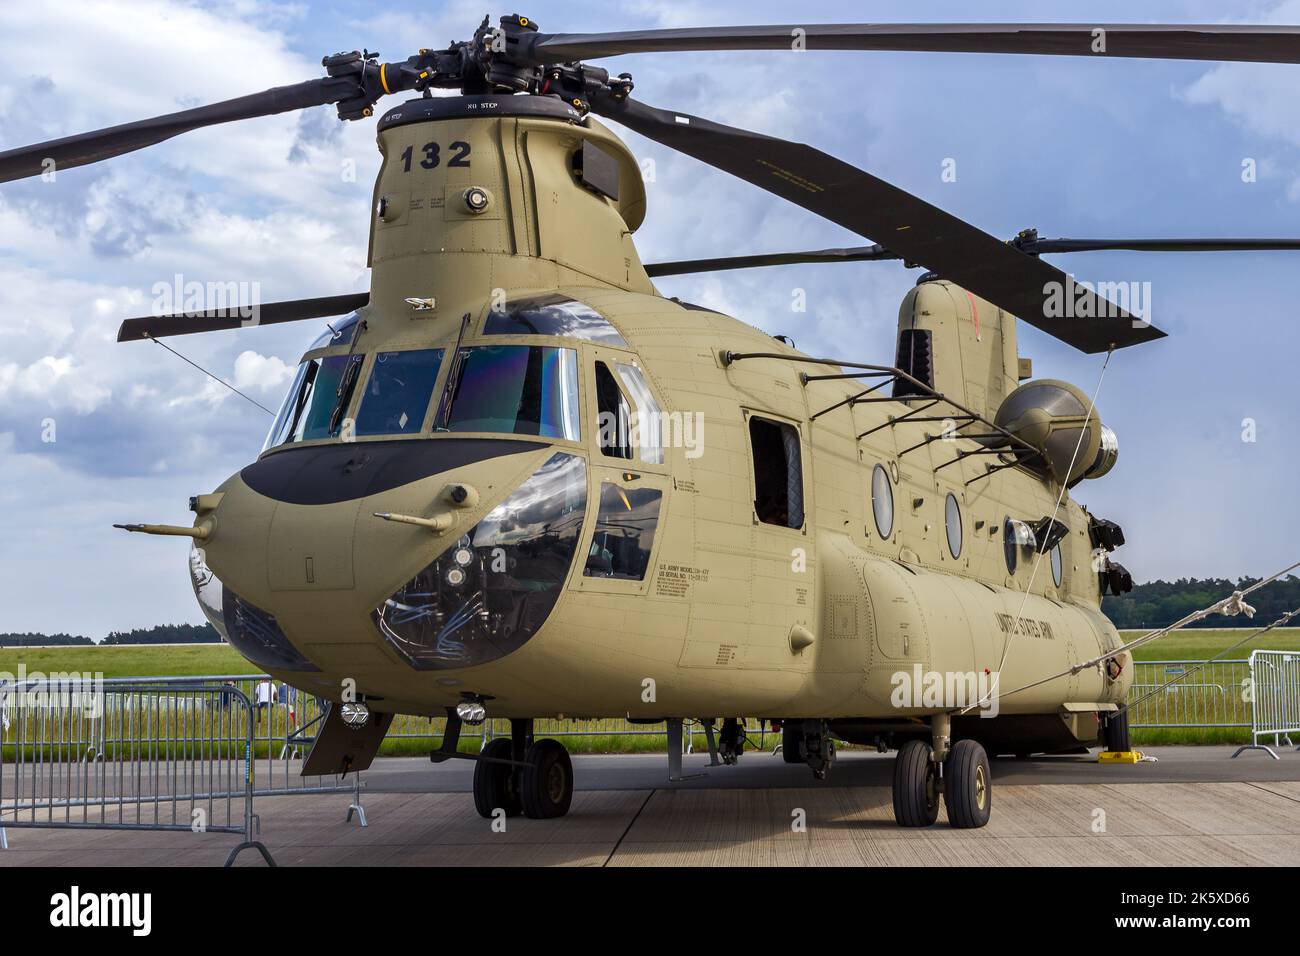 US Army Boeing CH-47F Chinook transport helicopter on static display at the Berlin ILA Airshow. Schonefeld, Germany - June 2, 2016 Stock Photo